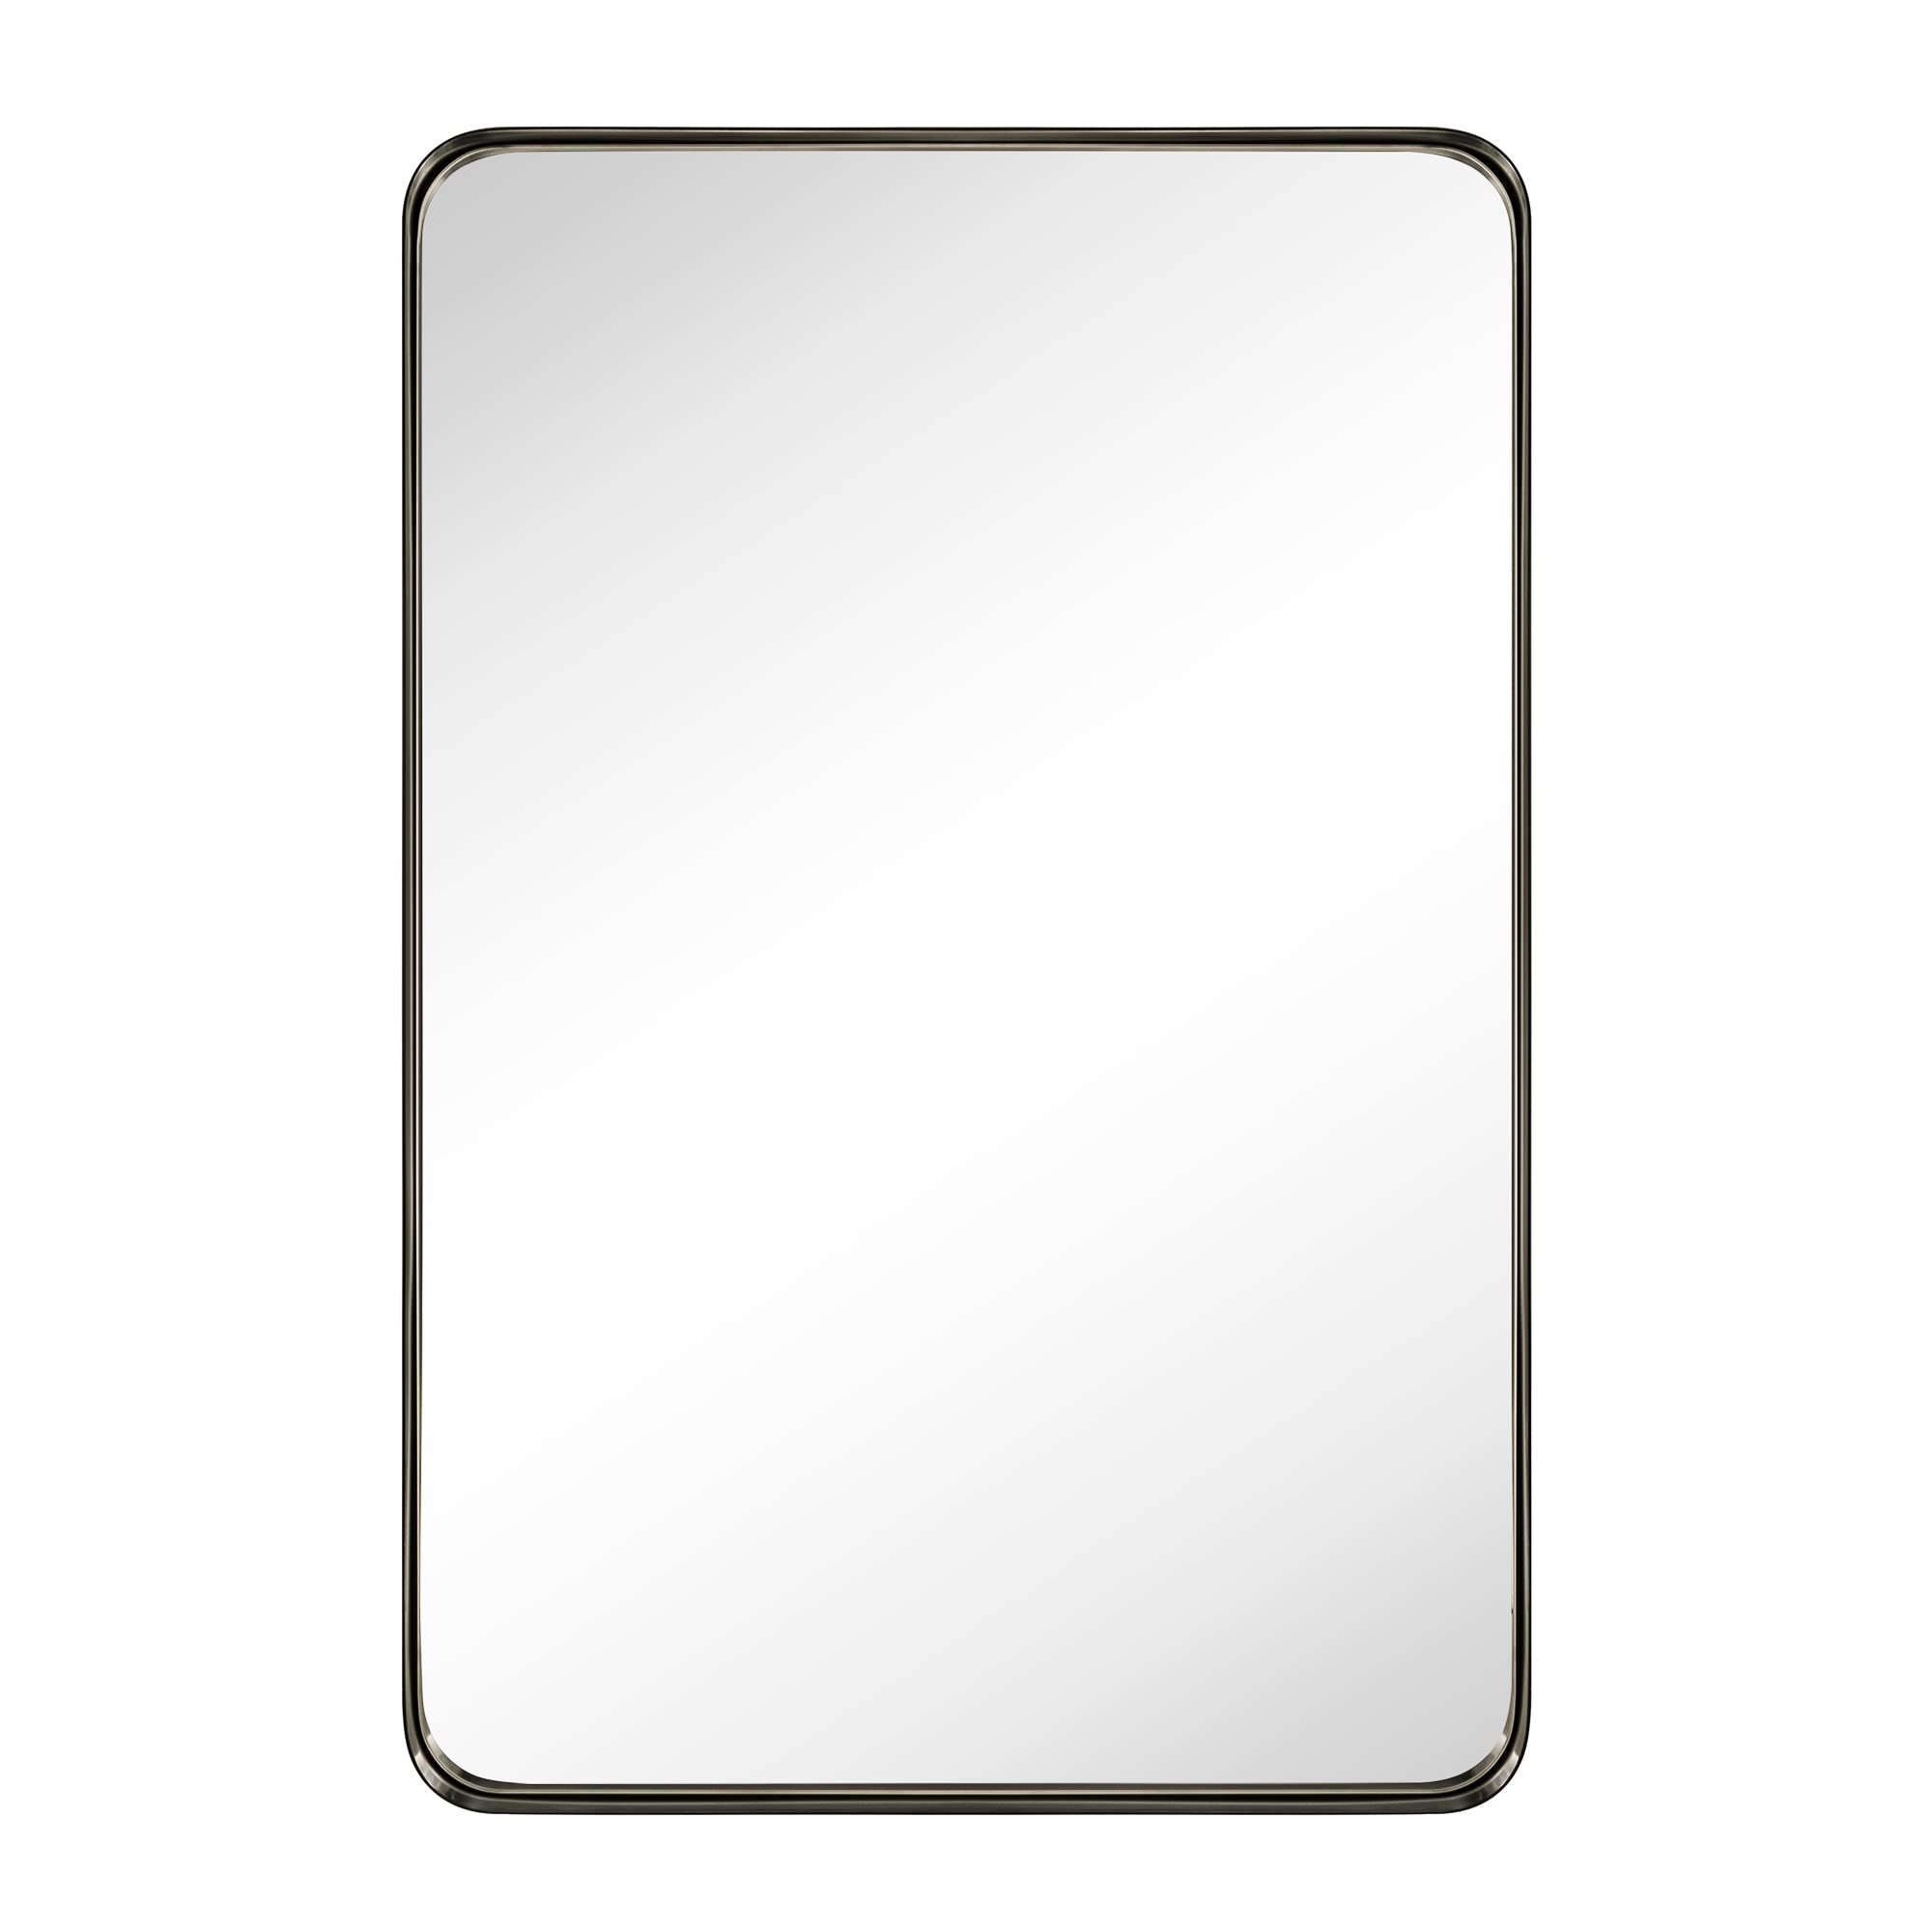 Arthers Rectangle Metal Wall Mirror-30x40-Oil Rubbed Bronze